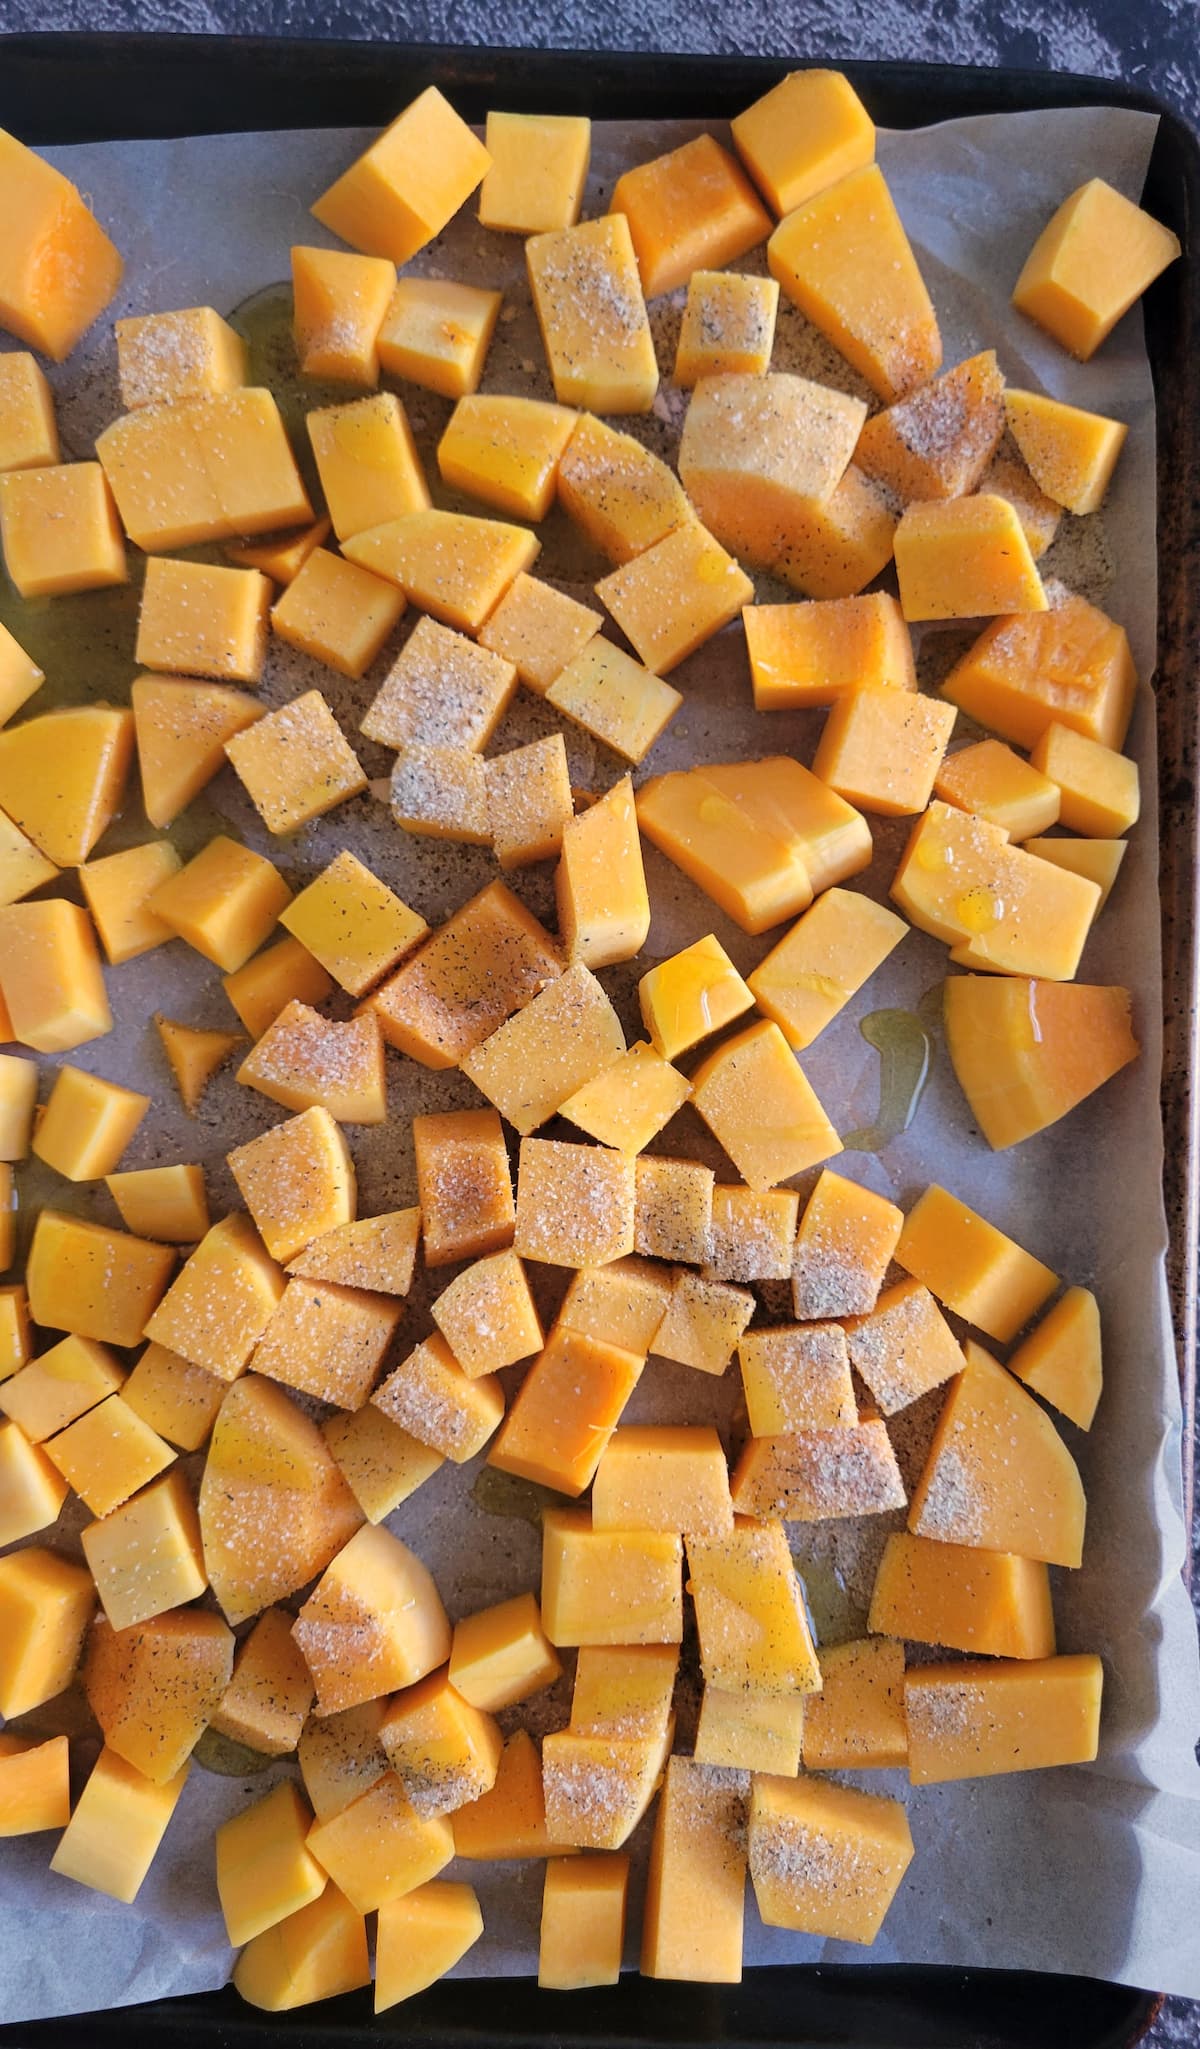 cubed butternut squash on a parchment lined baking sheet seasoned with salt and pepper